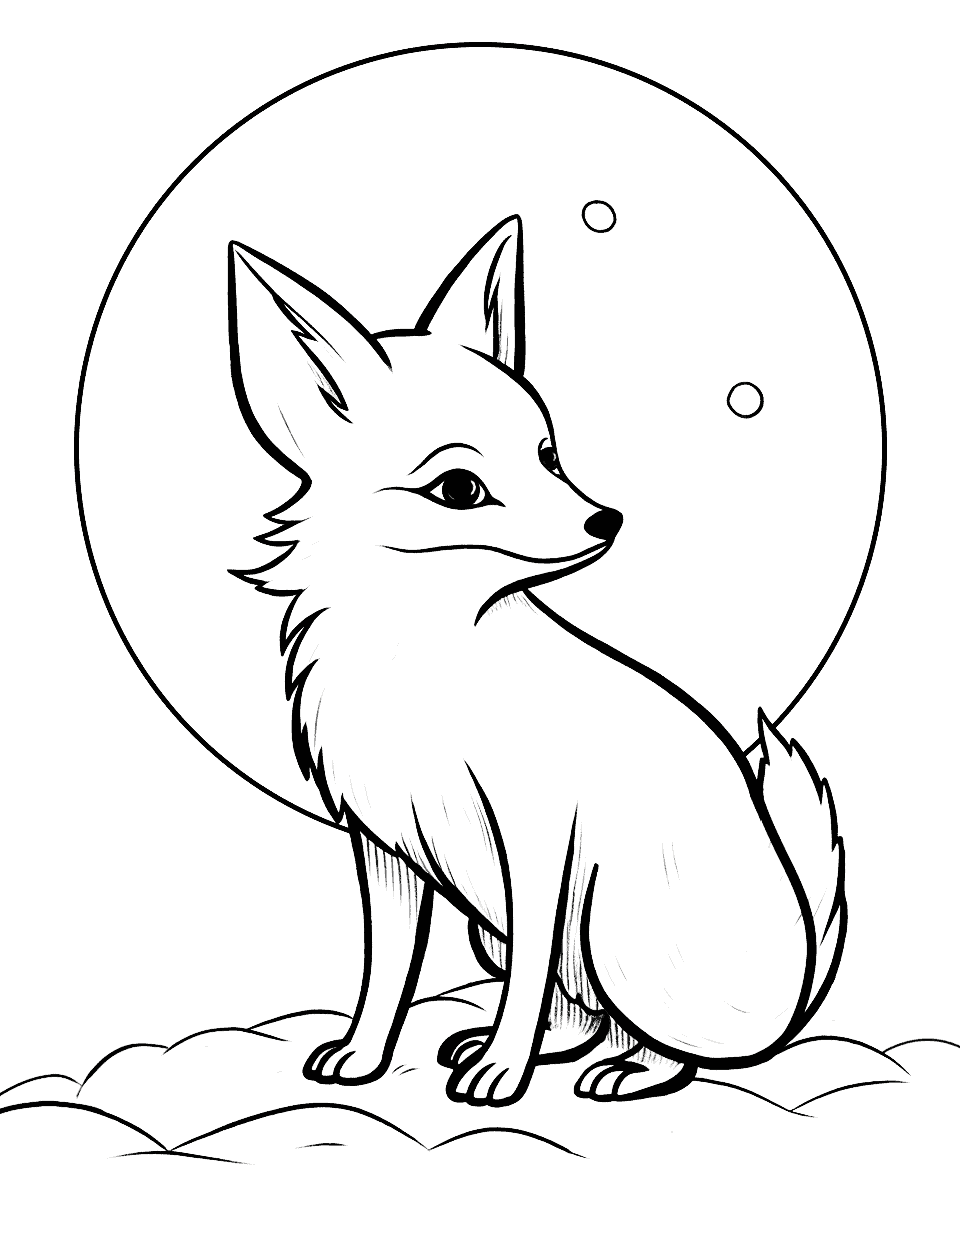 Female Fox in the Moonlight Coloring Page - A graceful female fox basking in the glow of a moon.